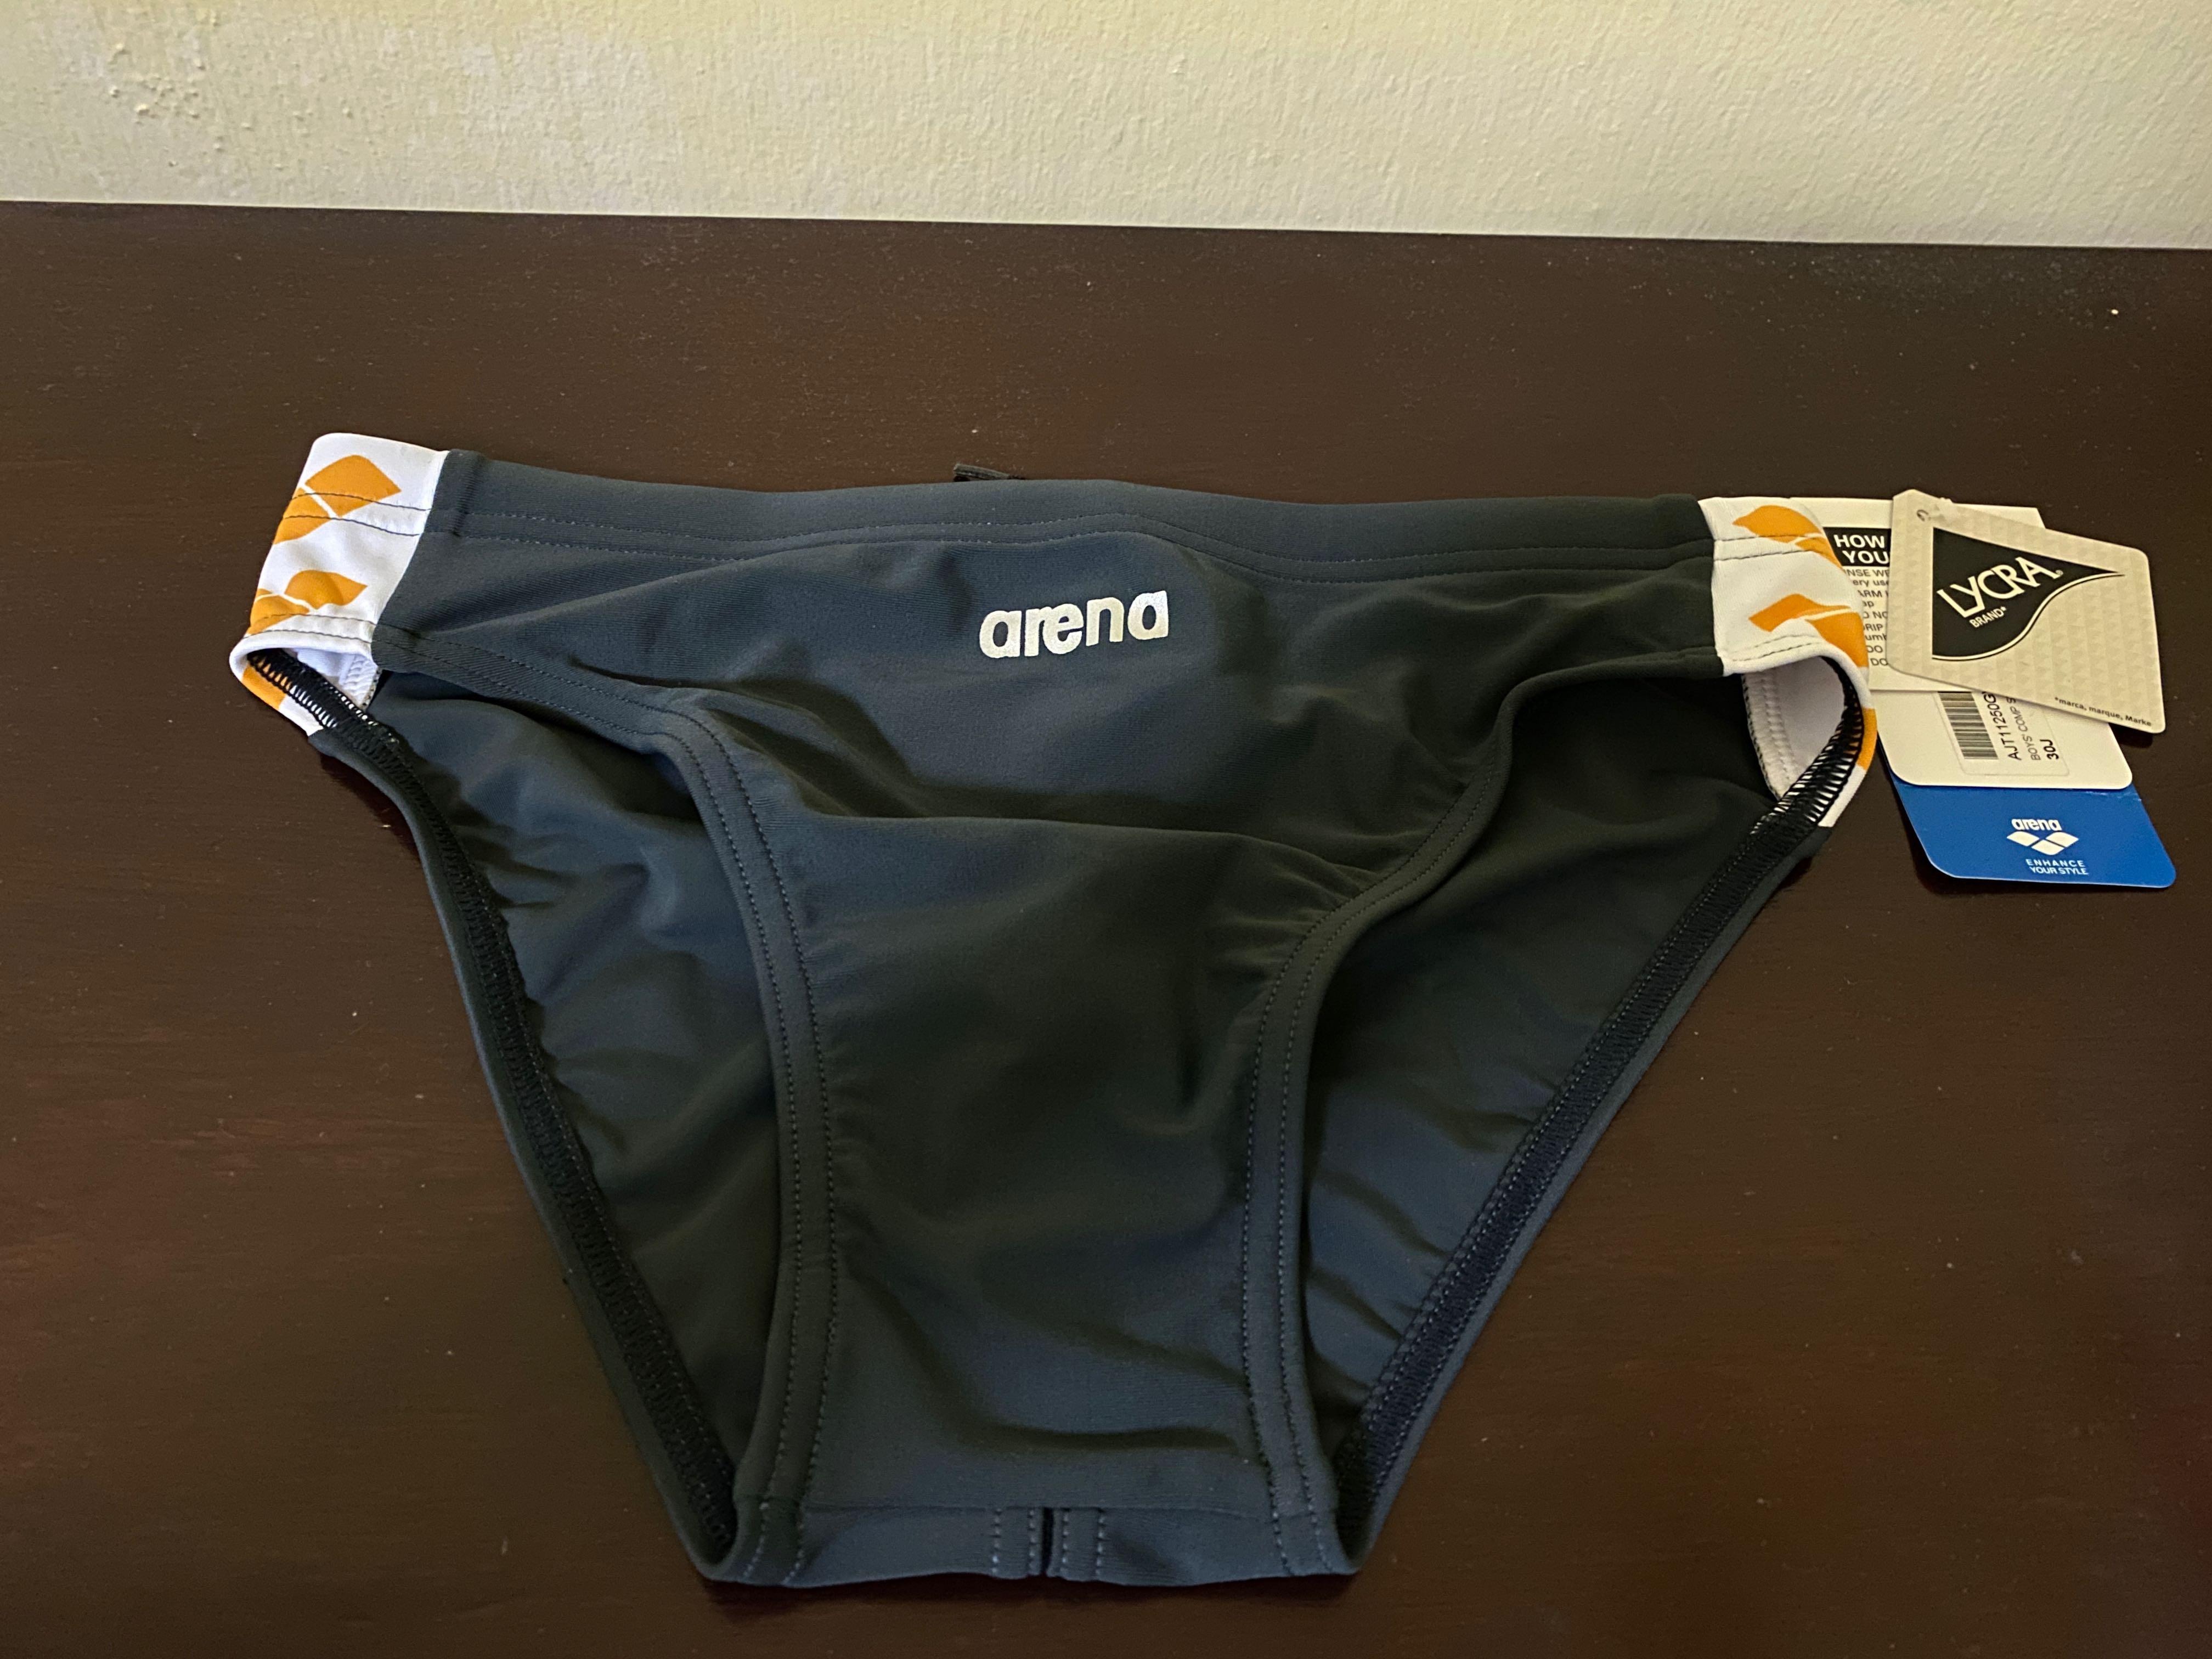 Arena Swimming Trunks, Sports Equipment, Sports & Games, Water Sports ...